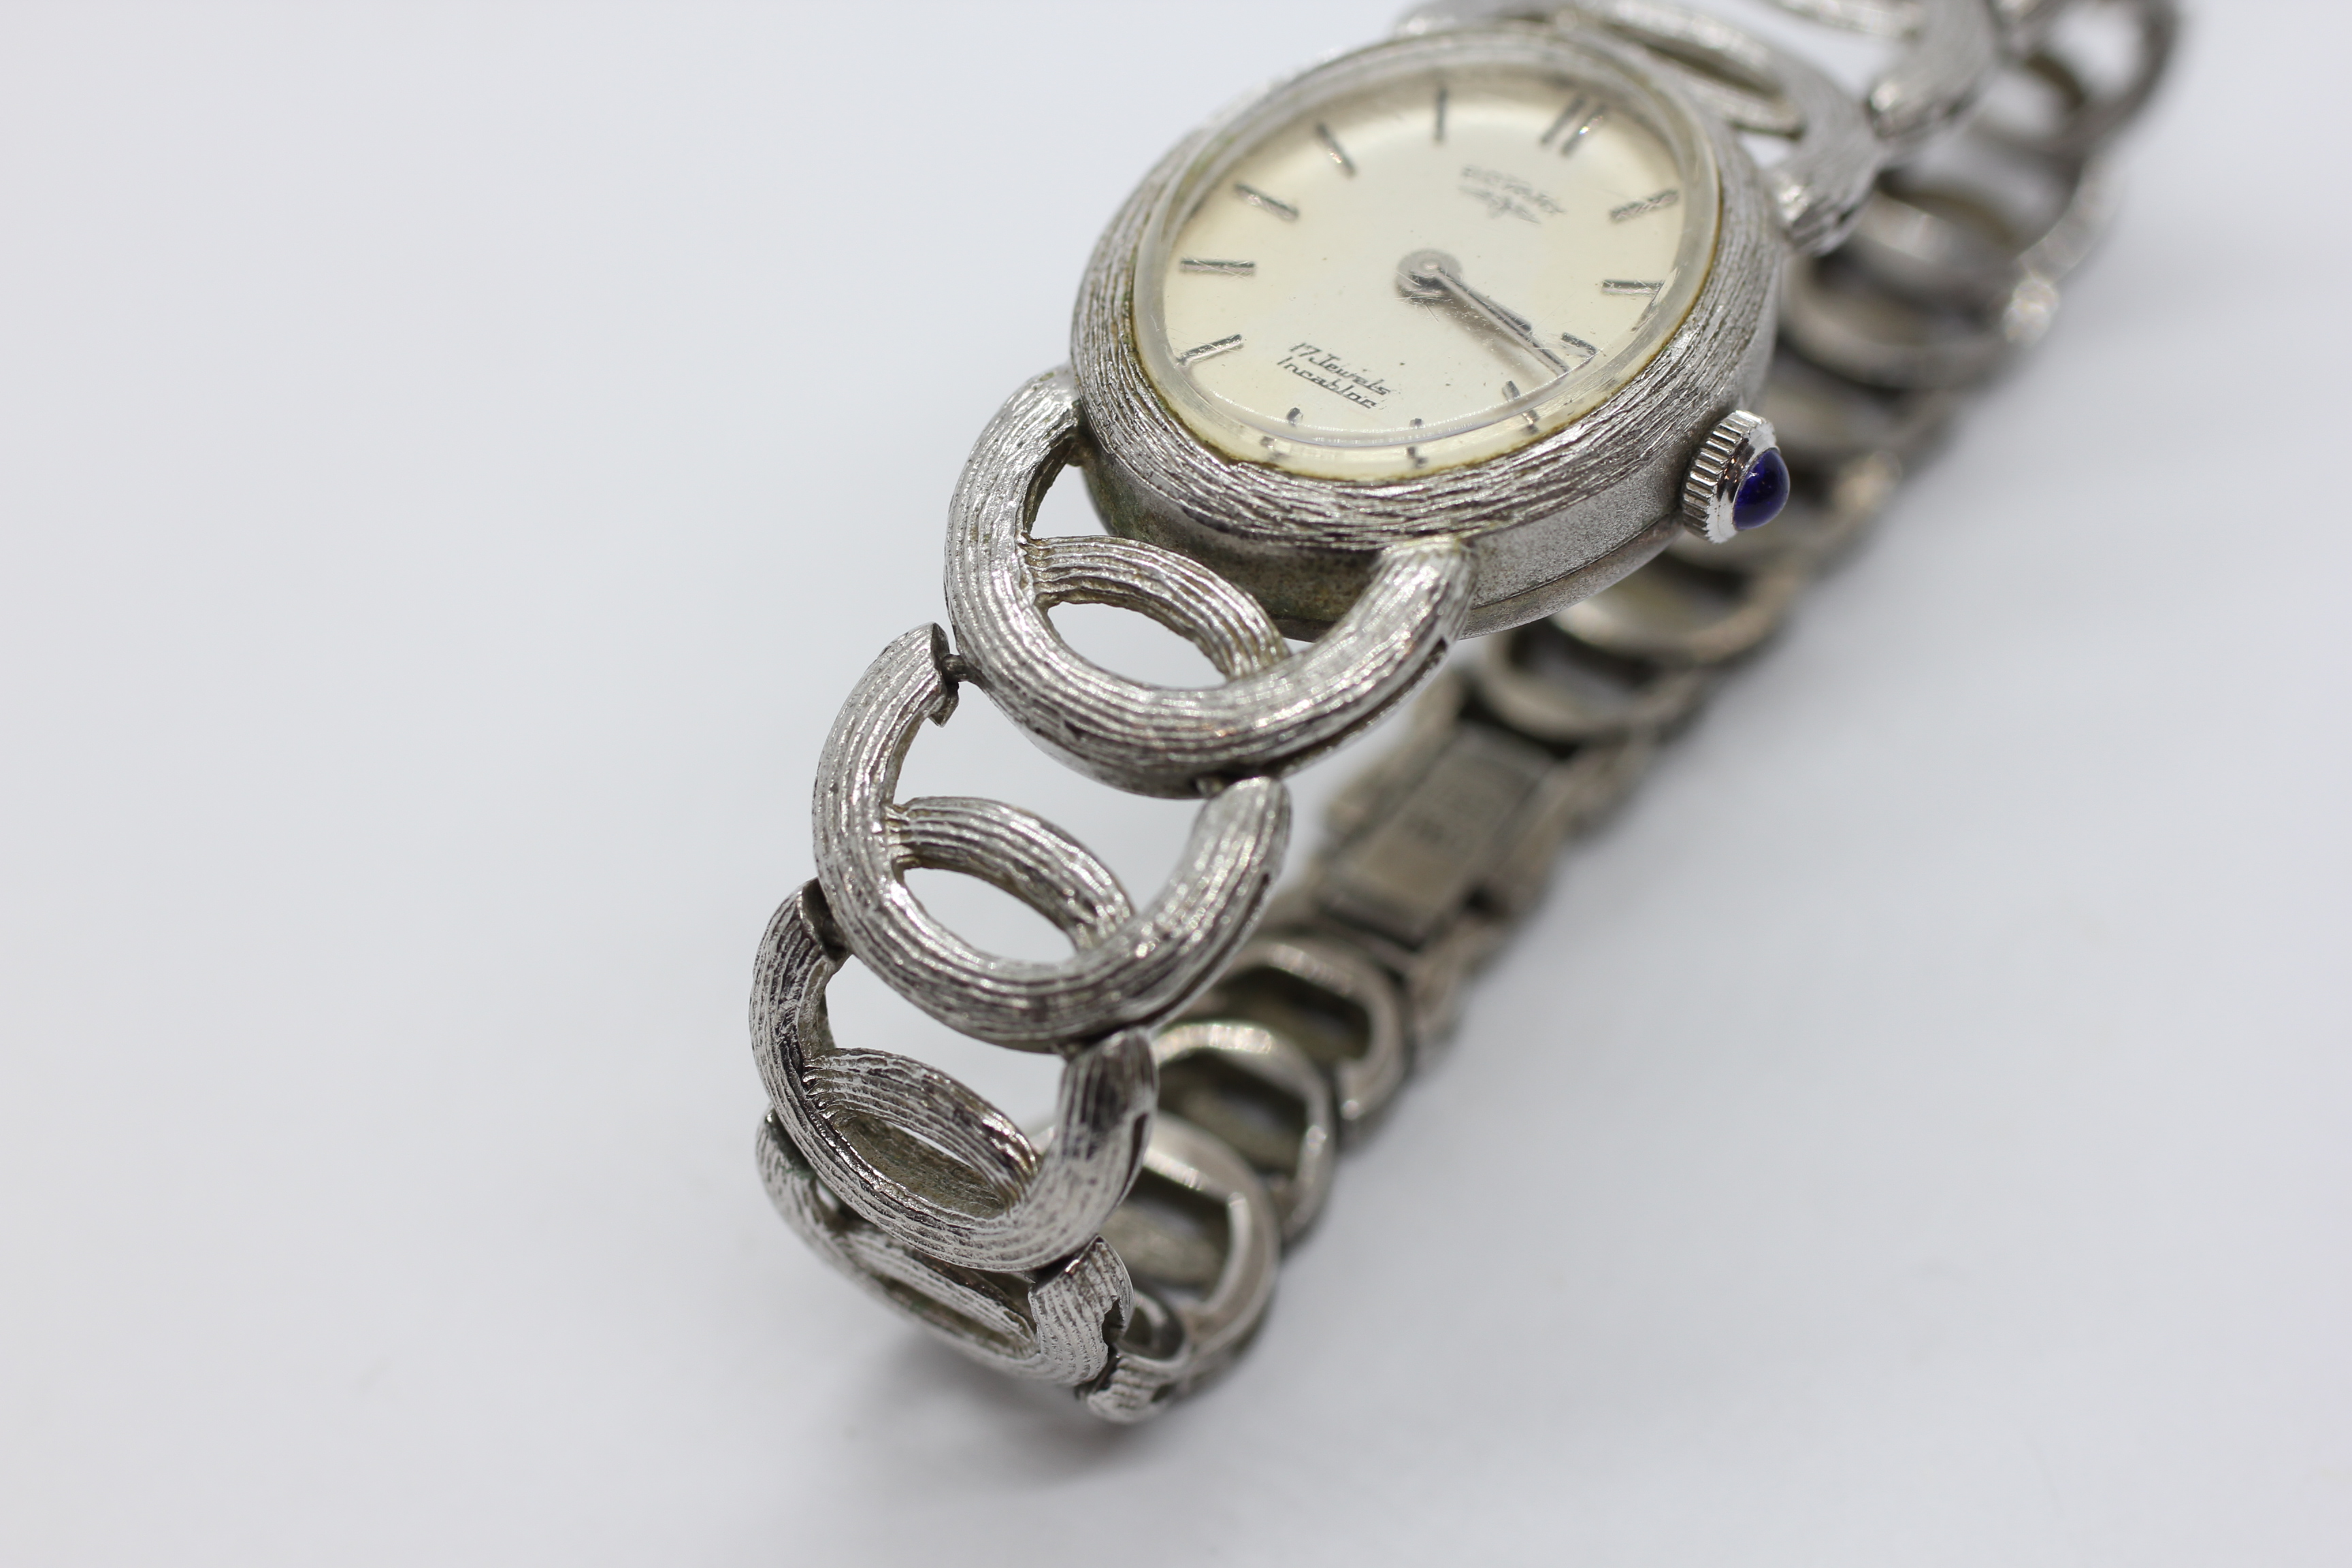 A LADIES SILVER ROTARY WRIST WATCH ON LINKED BRACELET. - Image 3 of 9